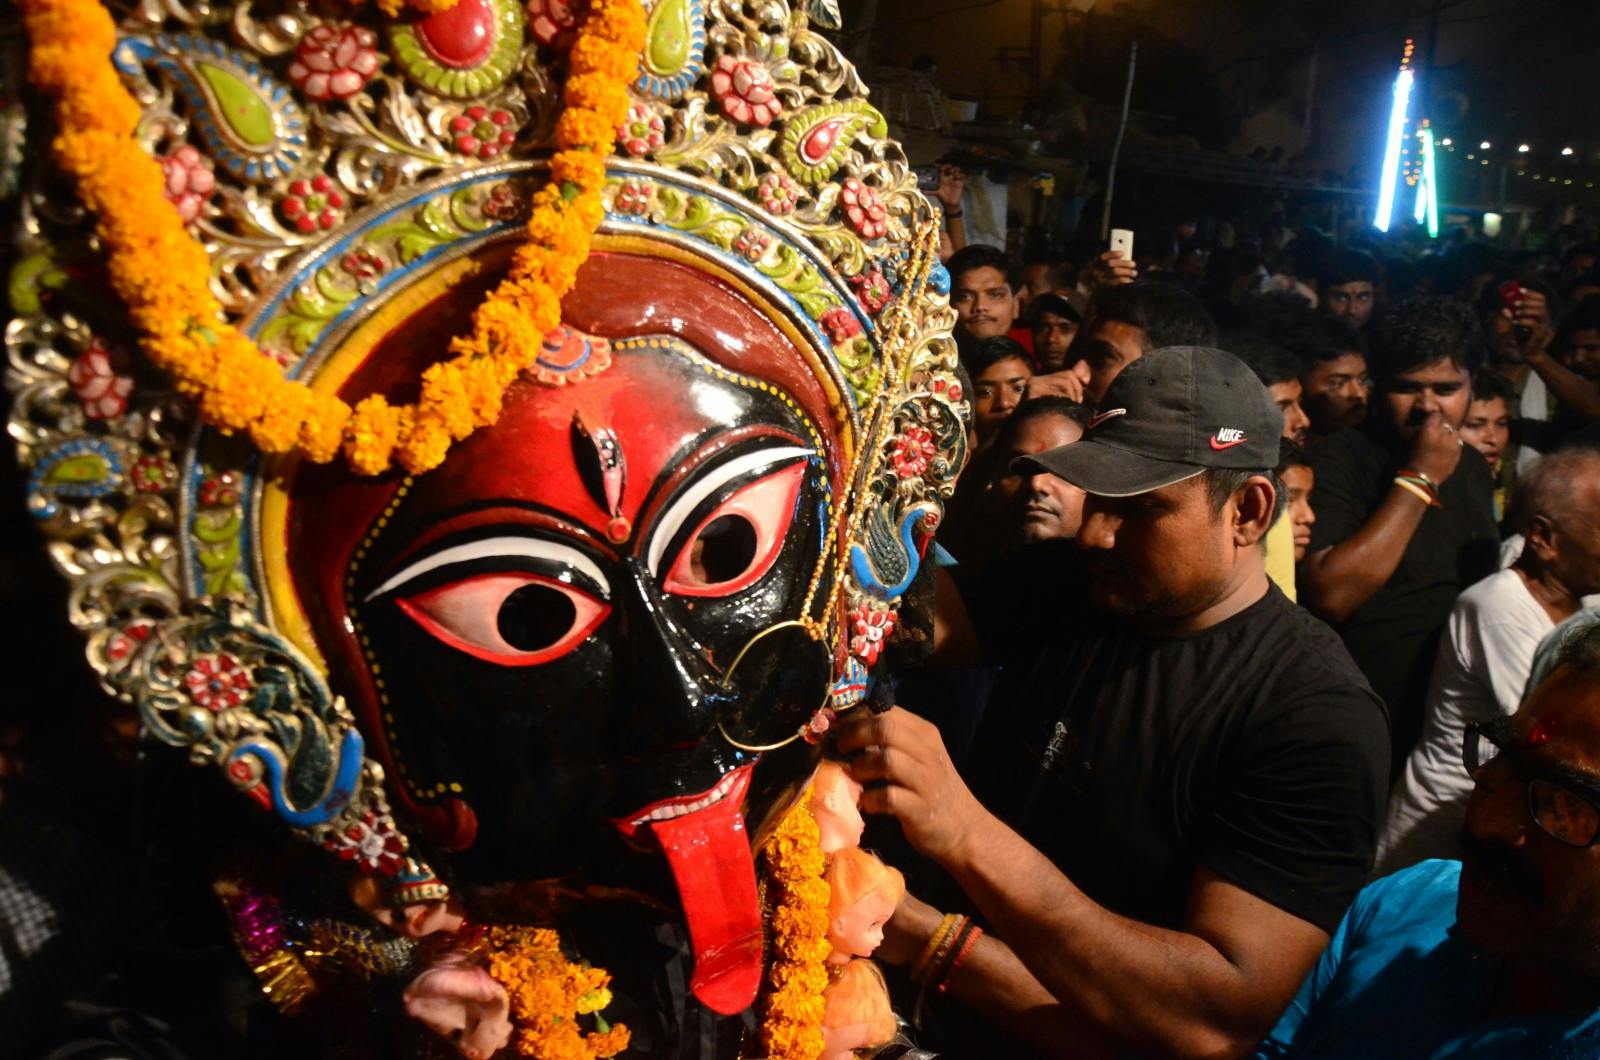 An Indian artist dressed as Hindu Goddess Kali performs the traditional ‘Kali Swang’ during Dussehra in Allahabad, India (Prabhat Kumar Verma/Pacific Press/LightRocket via Getty Images)